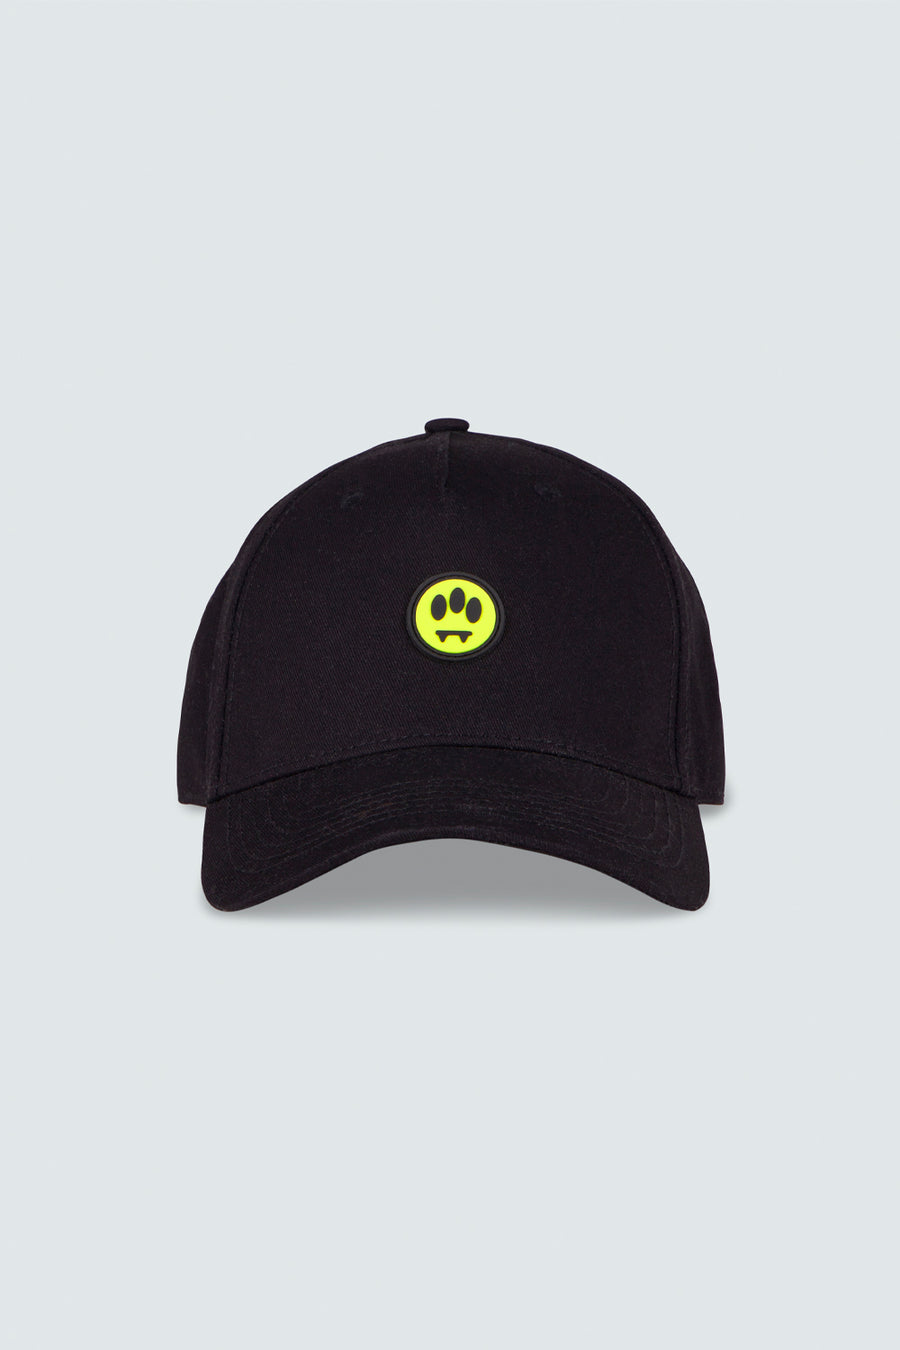 Buy the Barrow Minimal Smiley Logo Cap in Black at Intro. Spend £50 for free UK delivery. Official stockists. We ship worldwide.